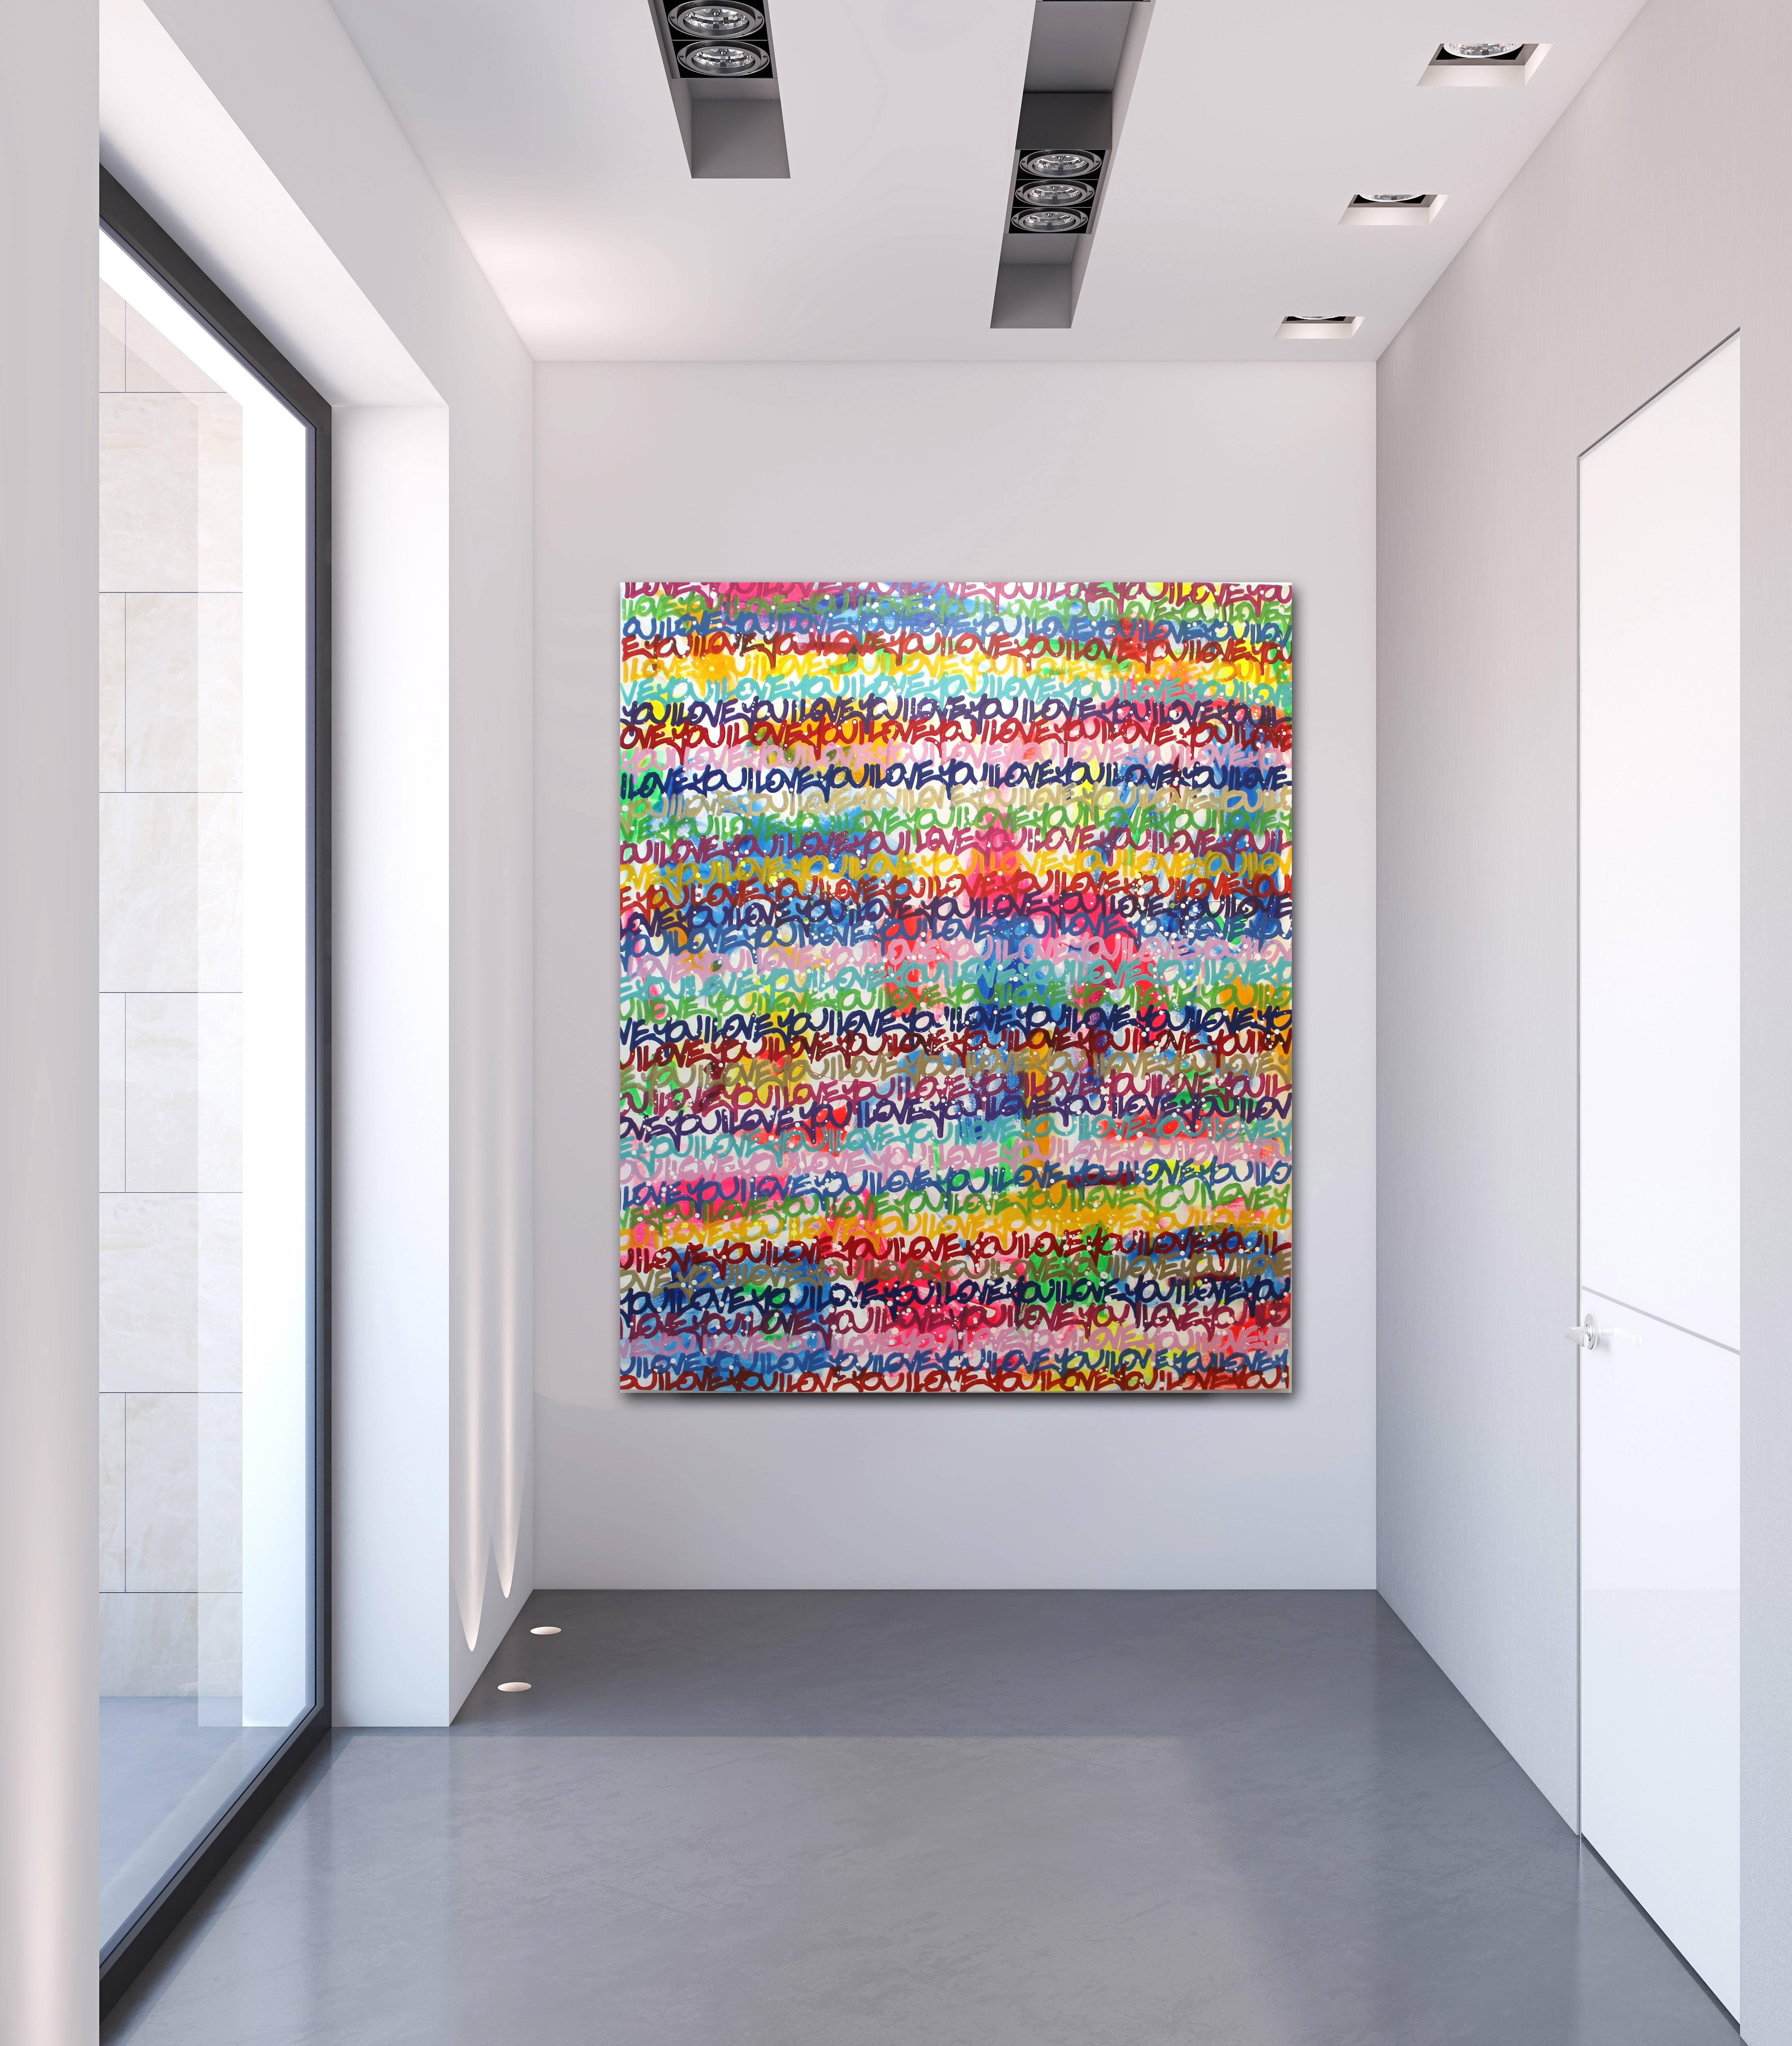 Los Angeles artist Amber Goldhammer paints vibrant, abstract compositions in acrylic on canvas featuring bold blocks of color and energetic brushstrokes. Goldhammer uses her contemporary paintings to express emotions akin to silent poetry while